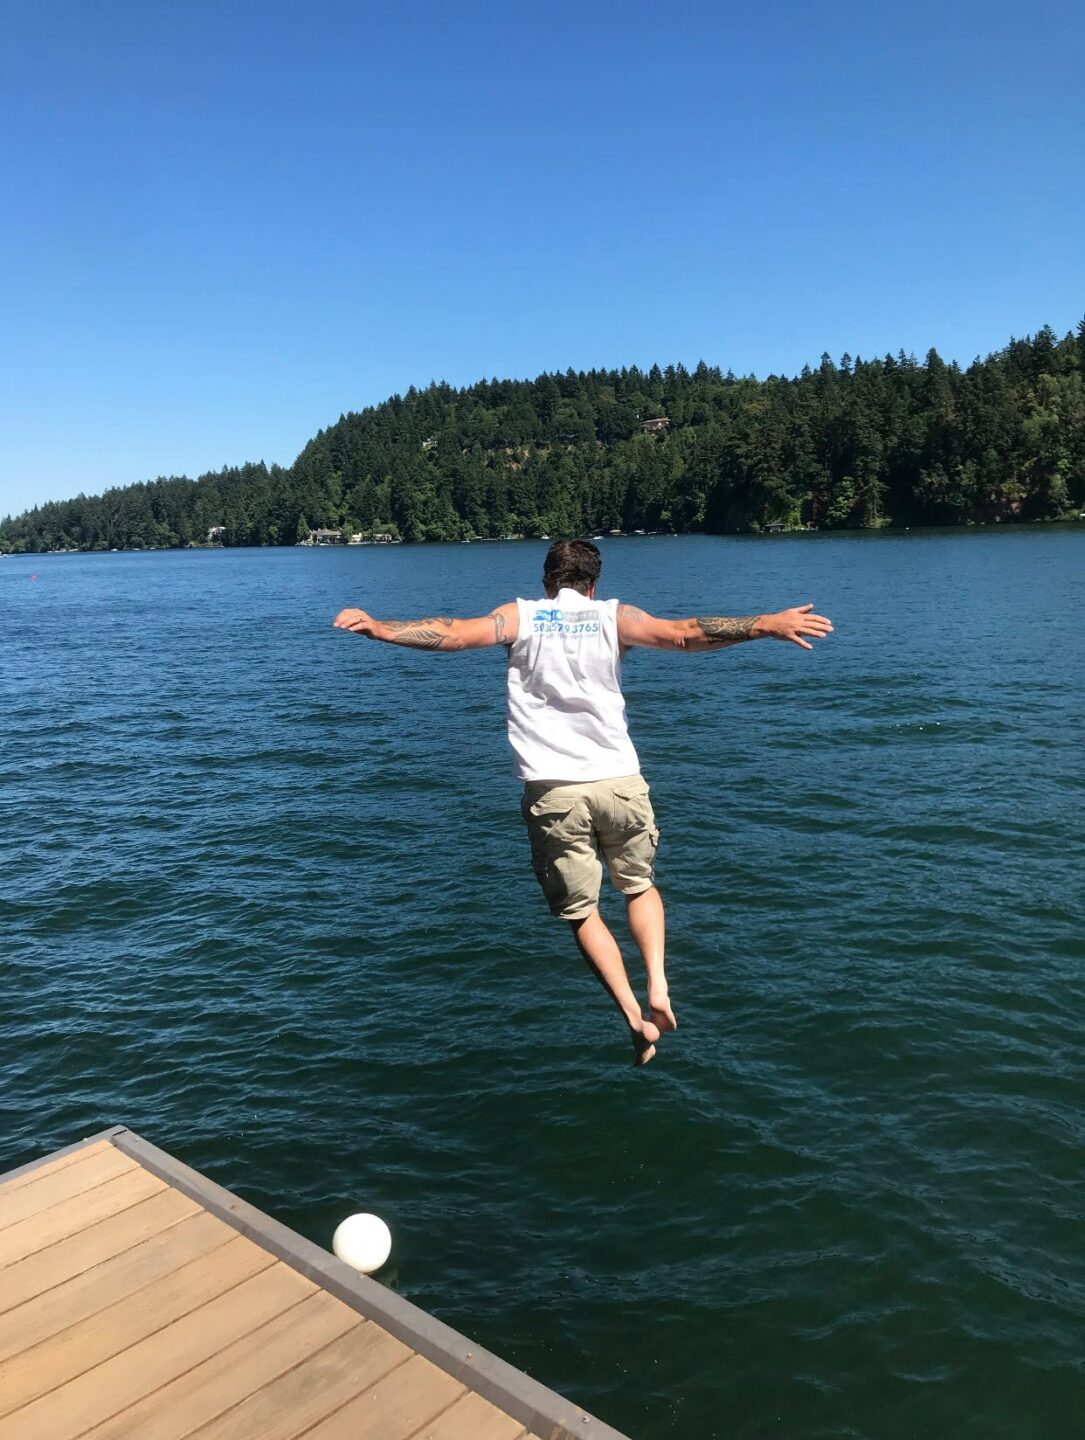 A person in a white tank top and shorts jumps off a dock into a lake, with their arms outstretched. Forested hills and a clear blue sky are in the background.